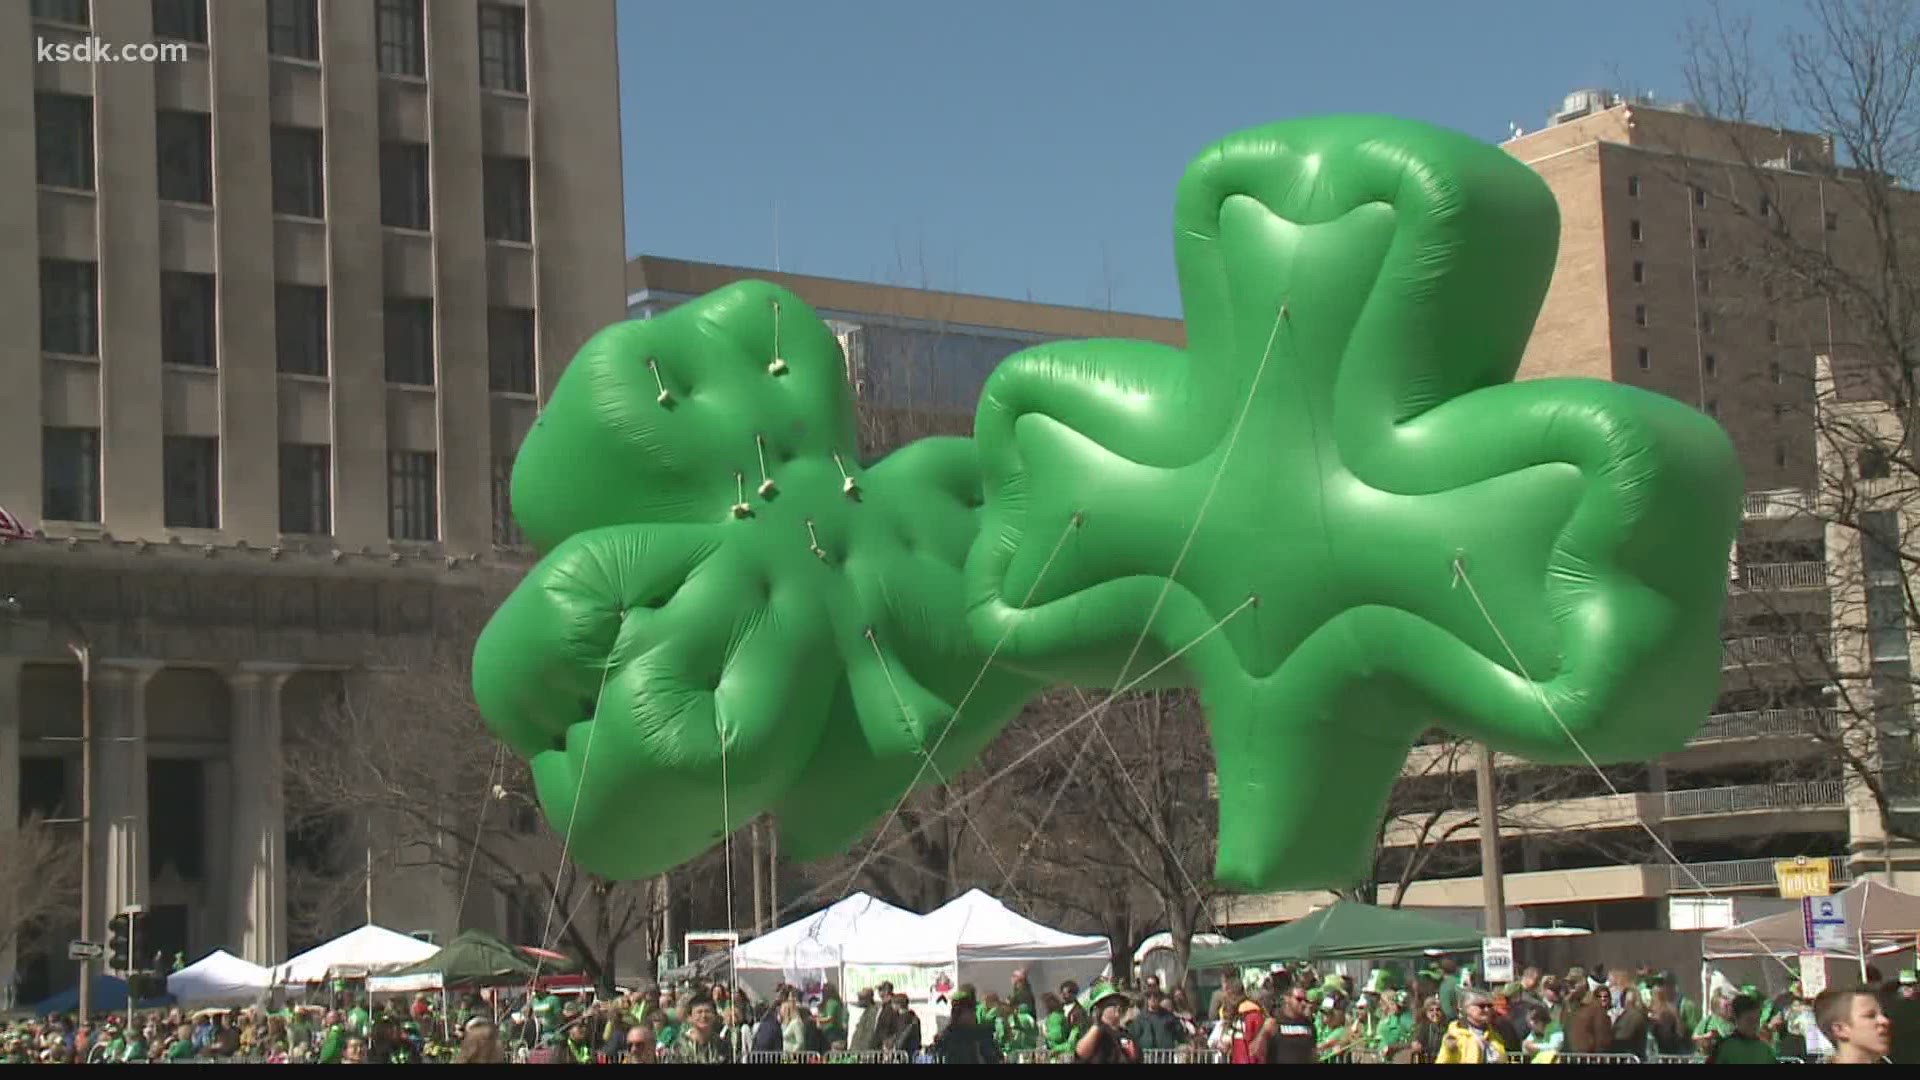 The 2020 parade was one of the first major events in St. Louis to be canceled due to coronavirus restrictions.